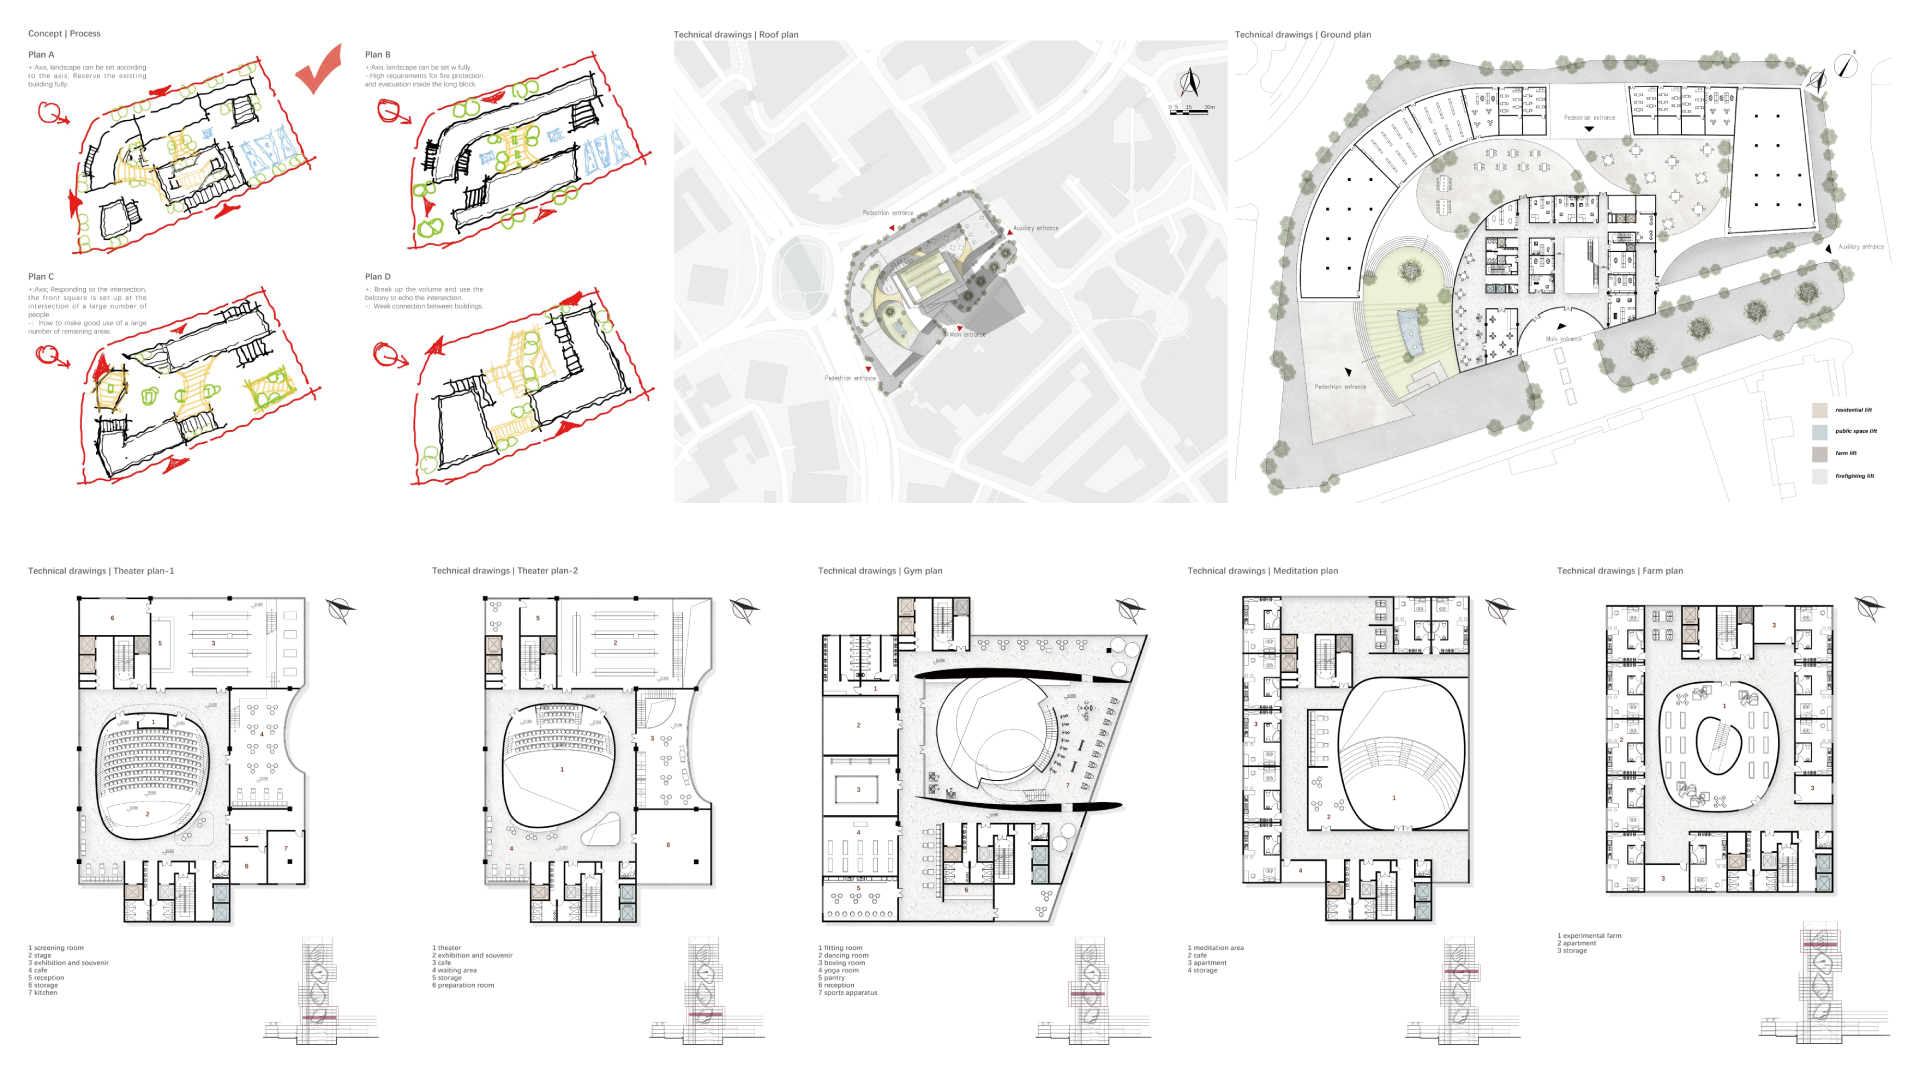 Design plans of the building